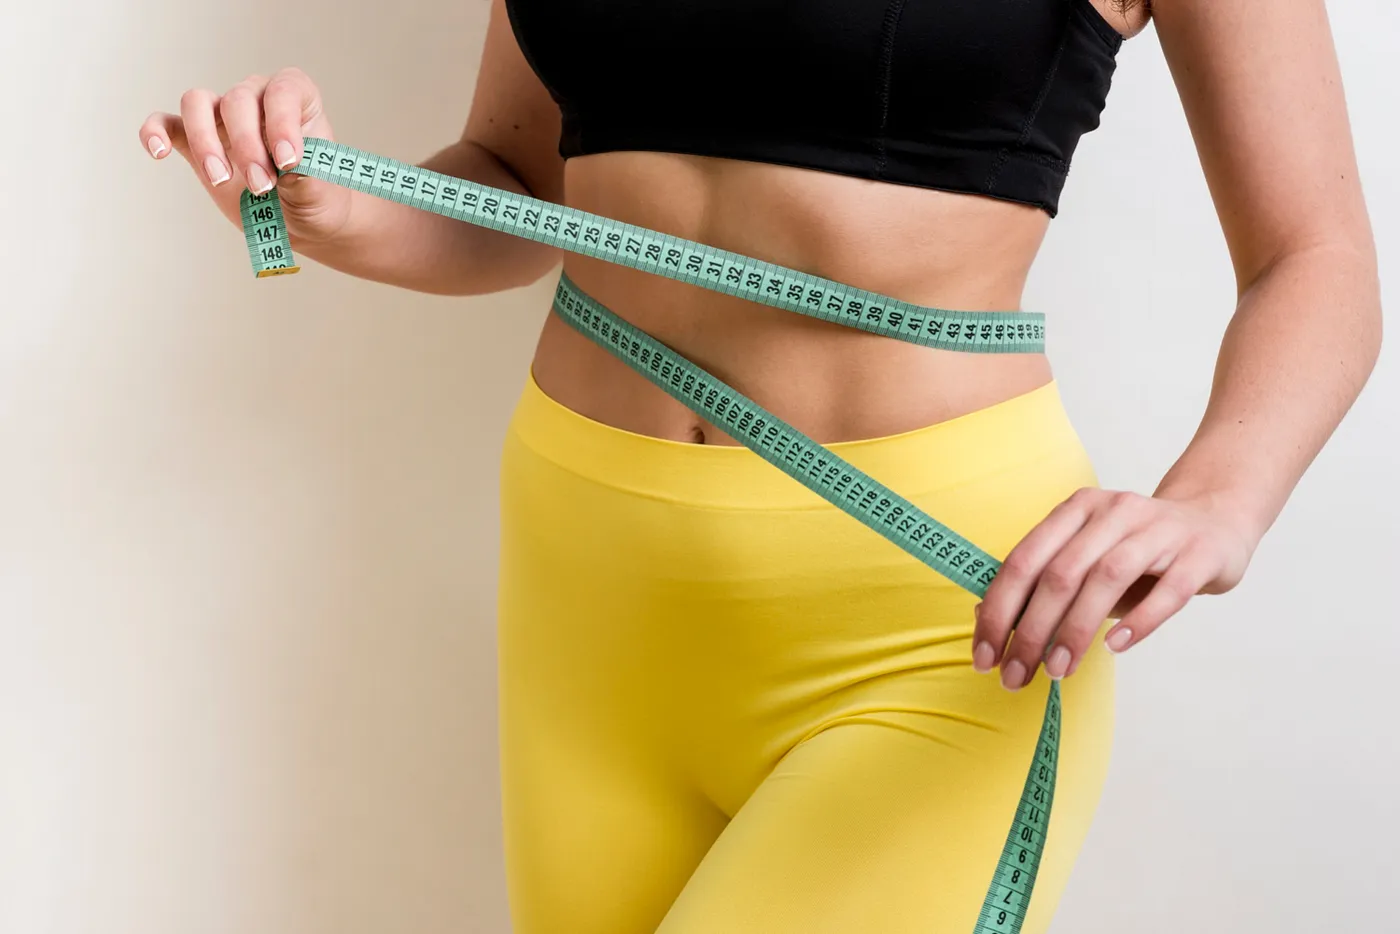 What Is the Ice Hack for Weight Loss?